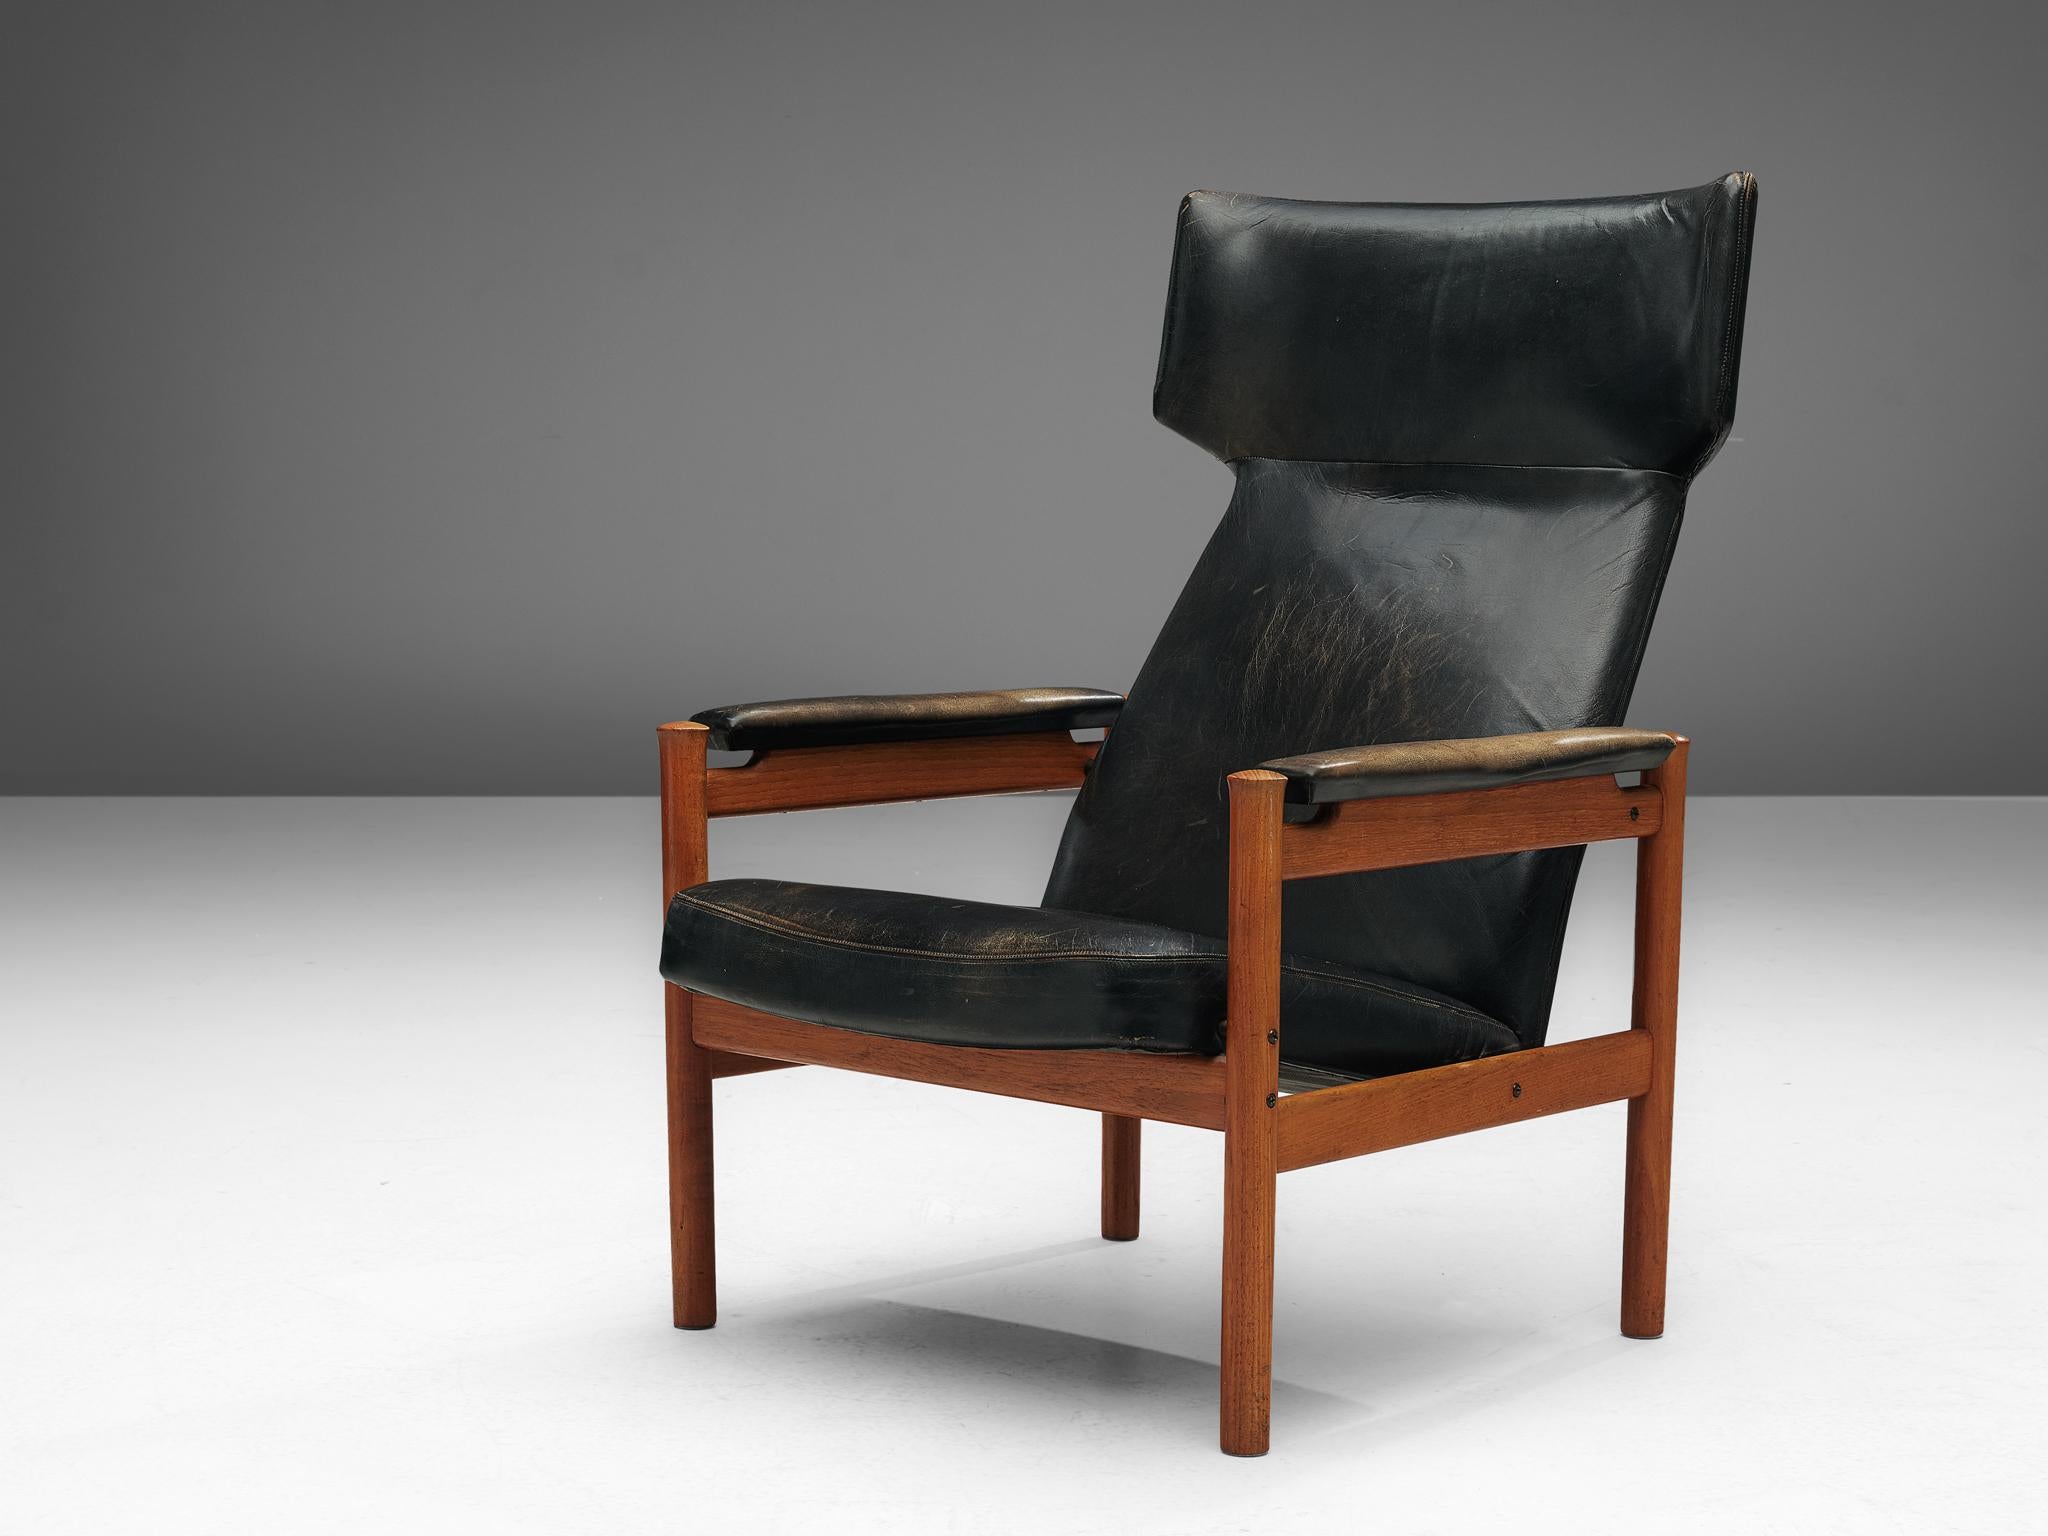 Søren Hansen for Fritz Hansen, model 4365 wingback chair, in teak and black leather, Denmark, 1960s. 

This chair, designed by Søren Hansen, is a Scandinavian Modern interpretation of the classic wing chair. The chair has a strong, robust appearance